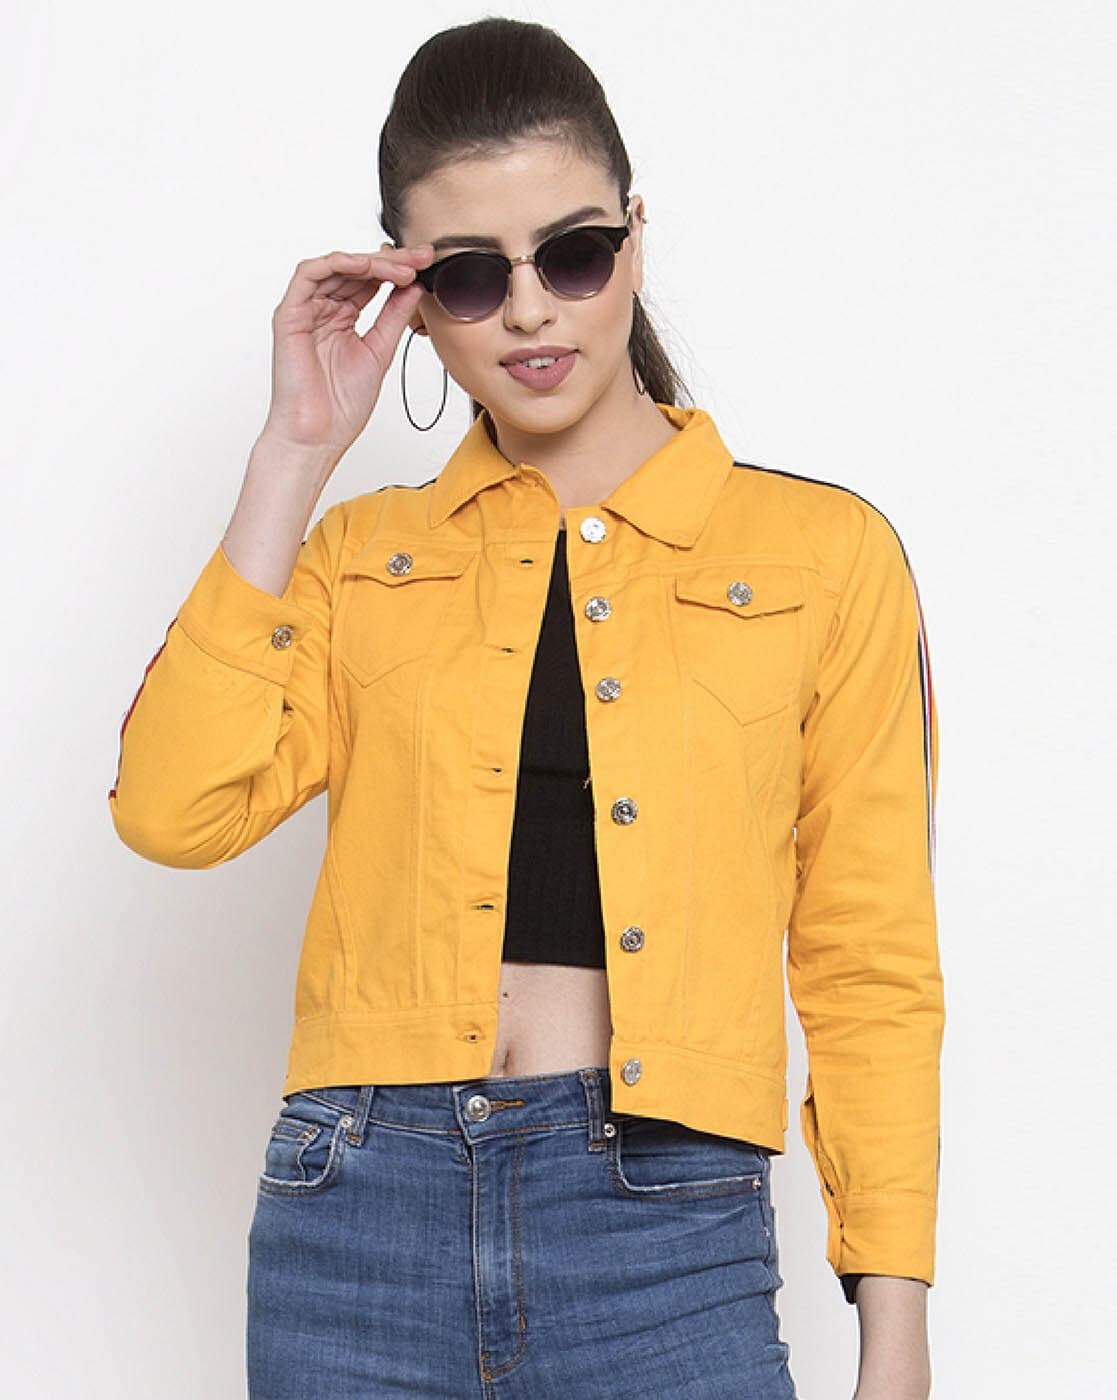 Contemporary Type Ii Trucker Jacket - Yellow | Levi's® US-totobed.com.vn